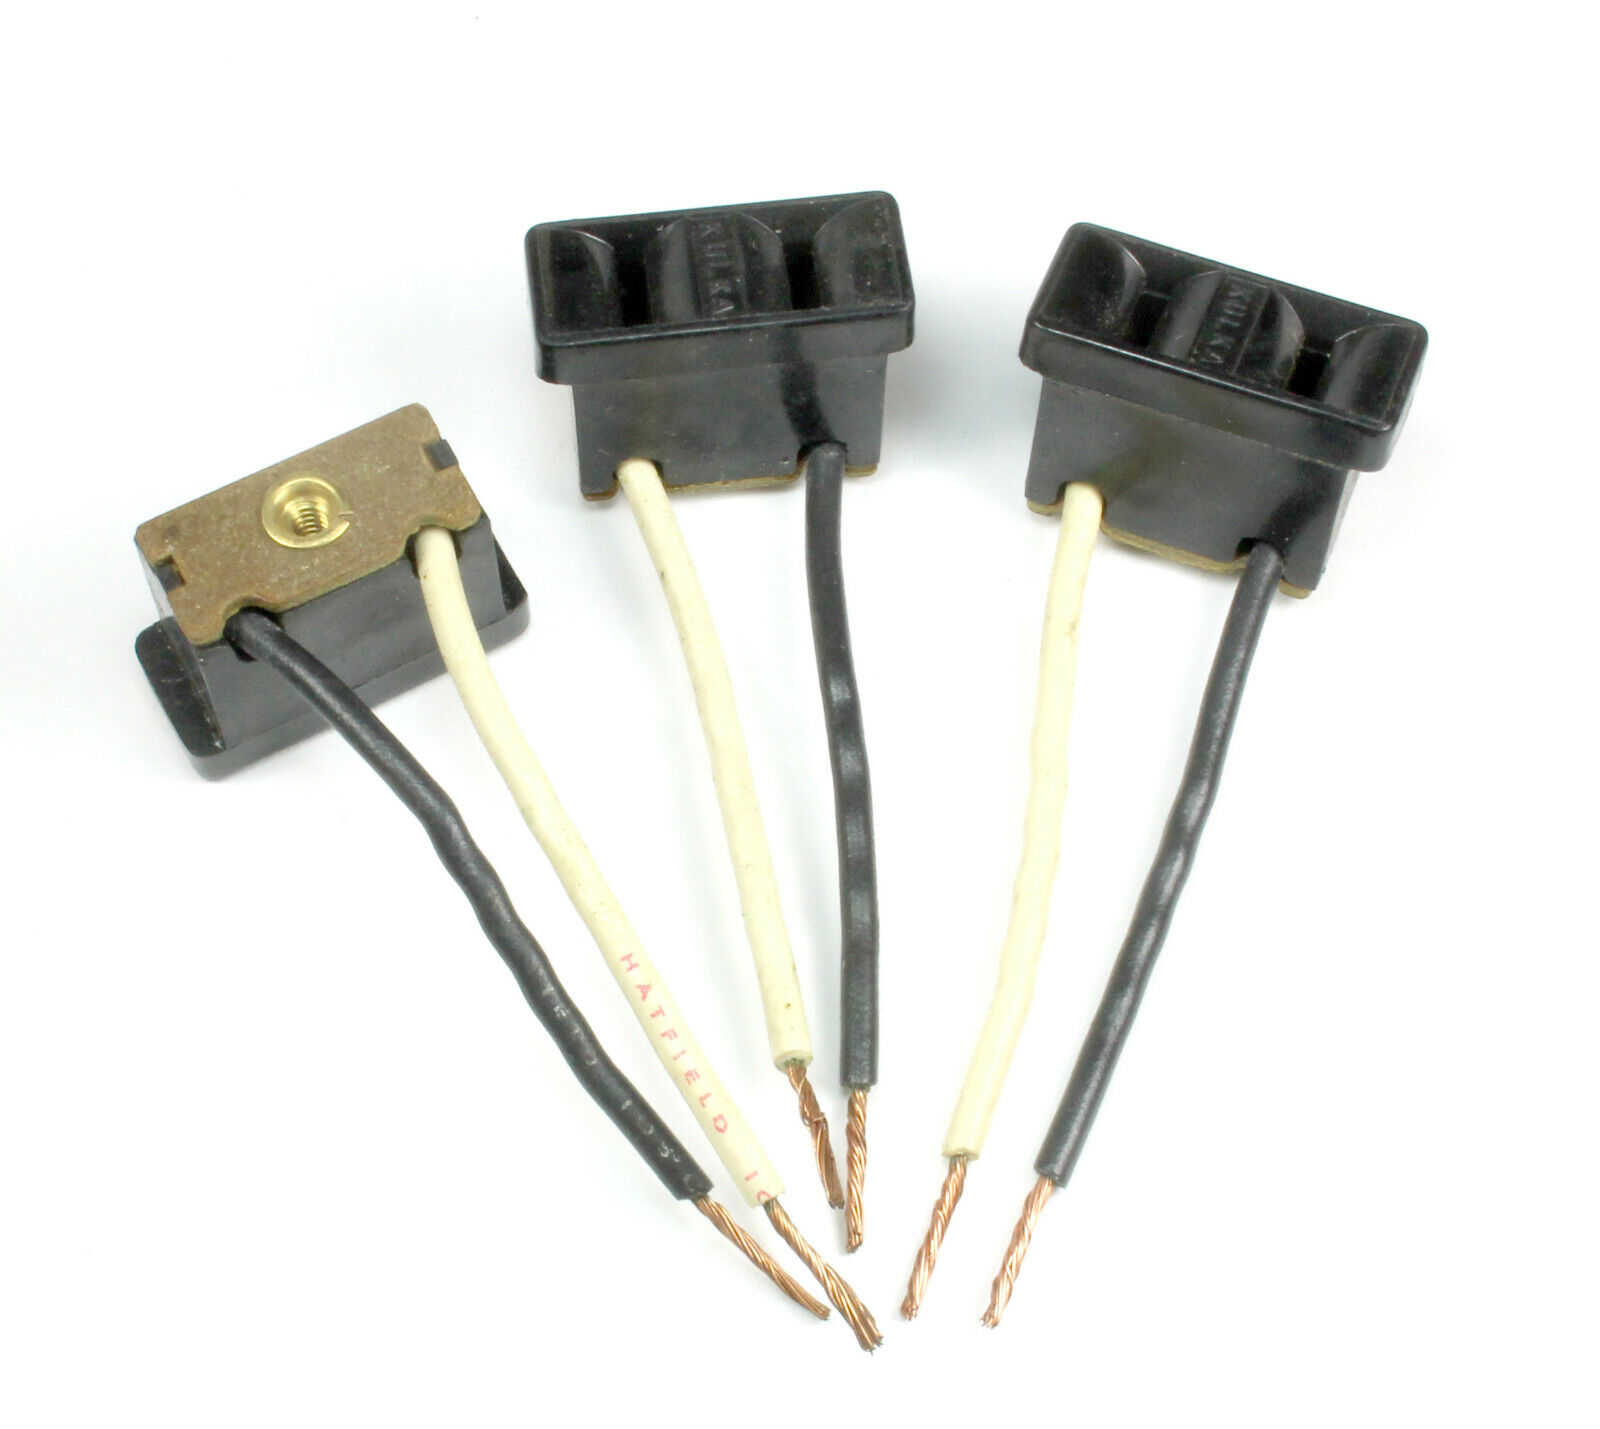 4pcs Convenience Attention brand Outlet 2 Prong With Leads Philadelphia Mall Black Devices Lamps